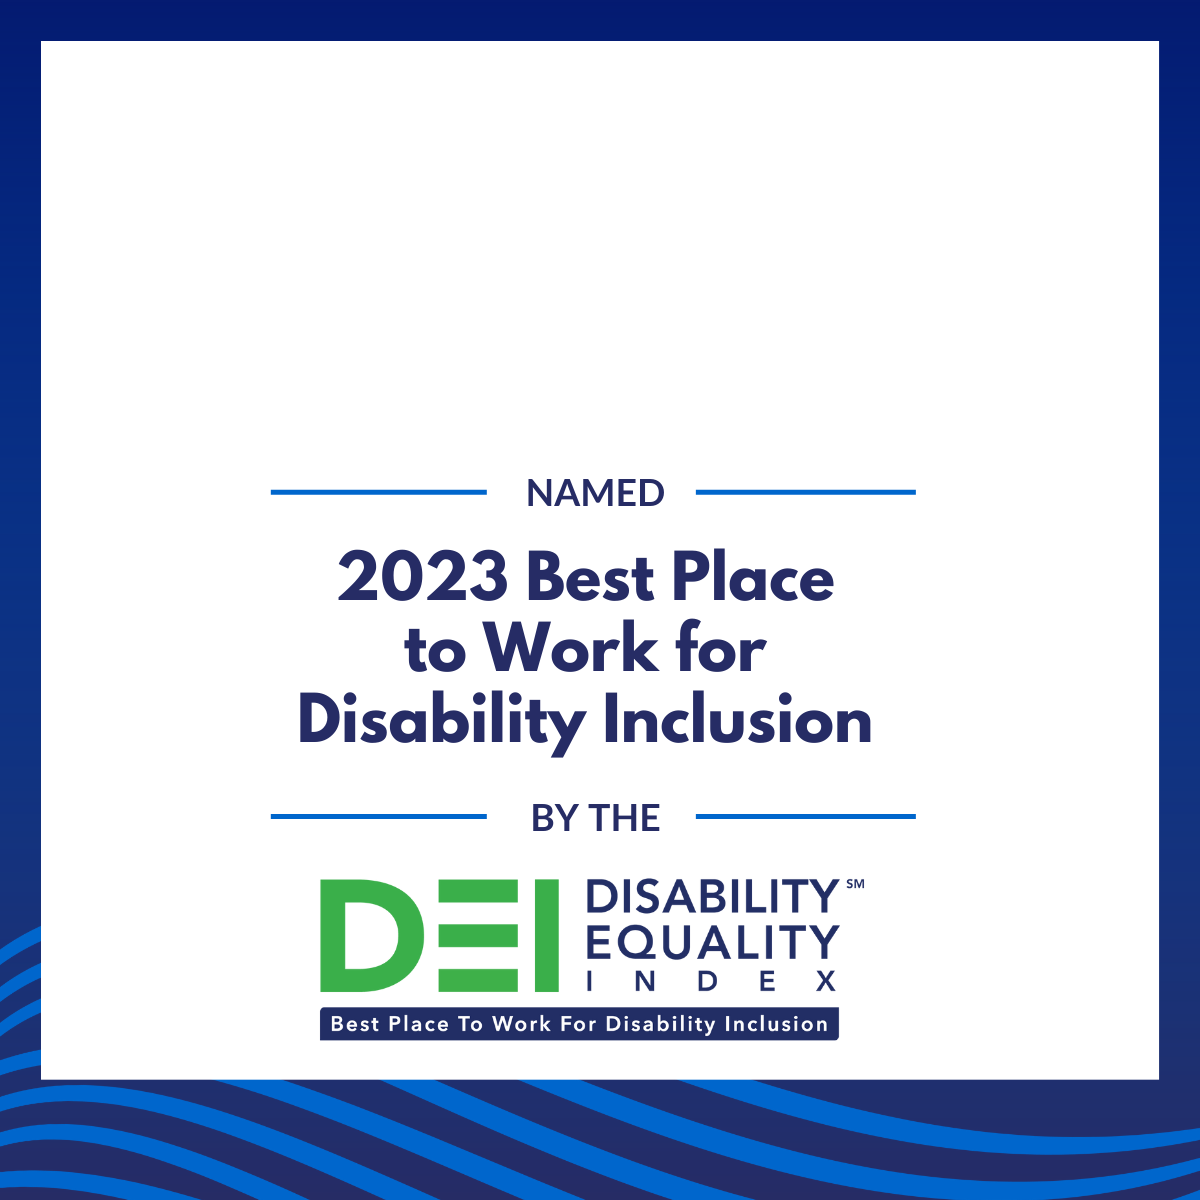 customizable graphic with a blue striped background and text reading: Named 2023 Best Place to Work for Disability Inclusion by the Disability Equality Index